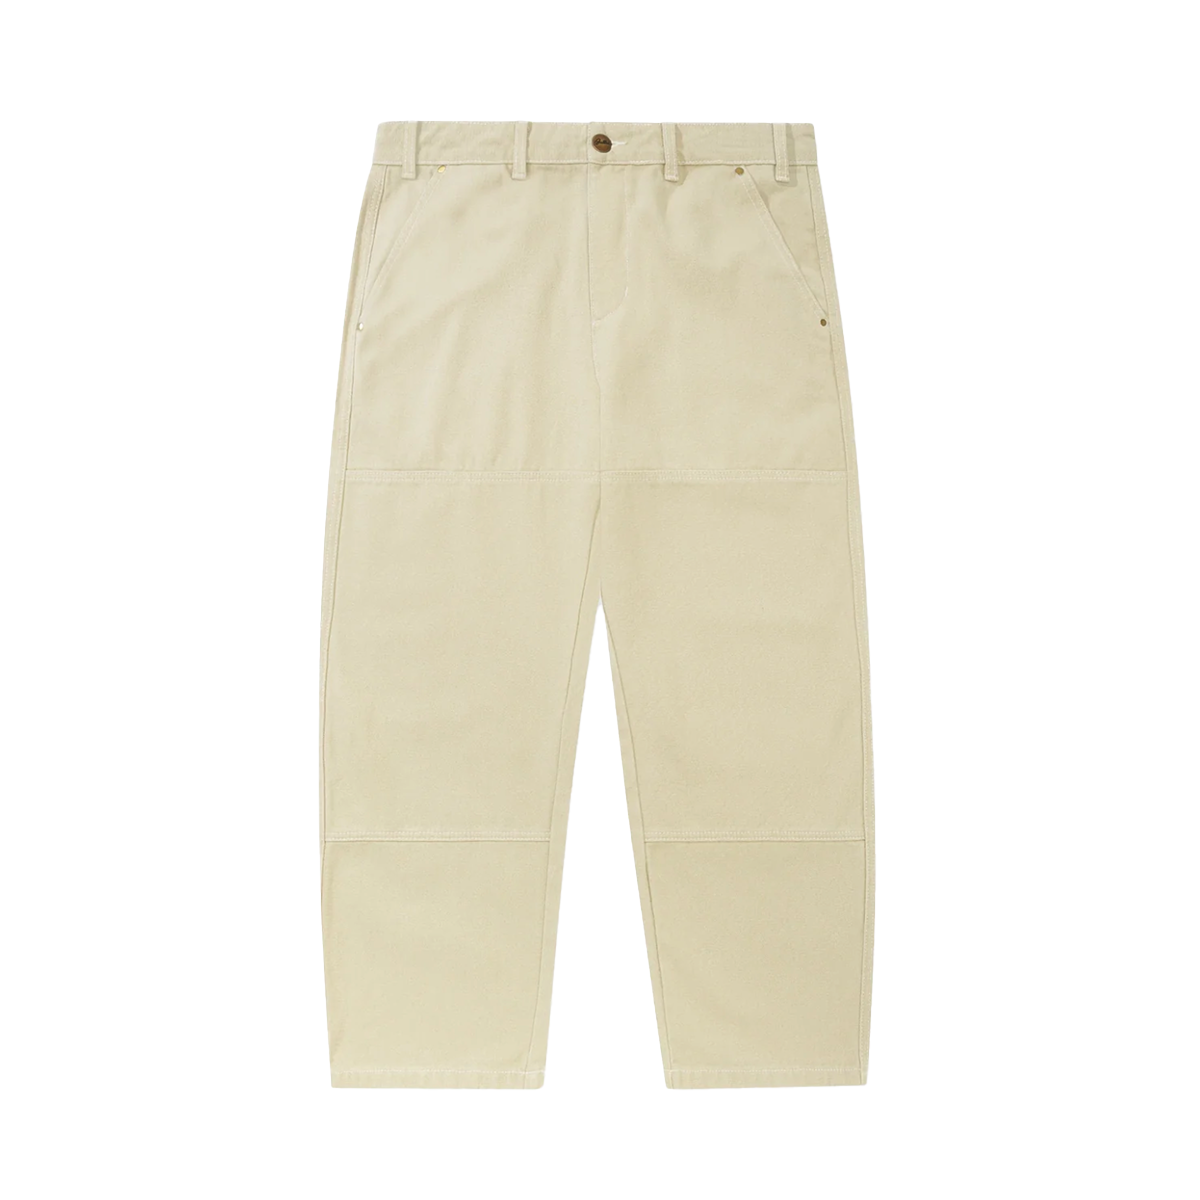 Butter Work Double Knee Pants - Washed Khaki